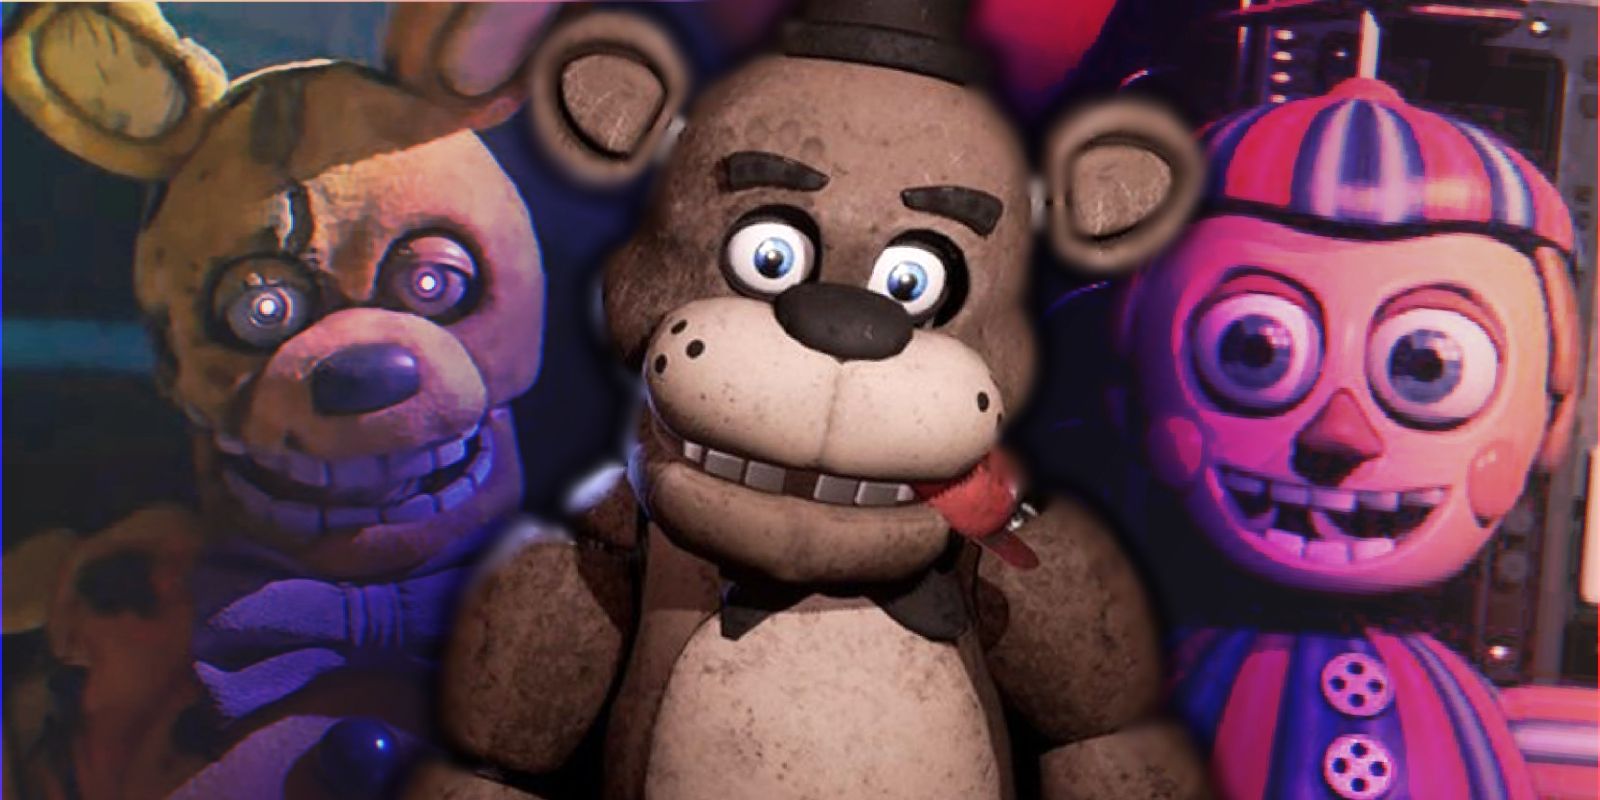 Does Five Nights At Freddy's Have a Post-Credit Scene? End Credits Explained